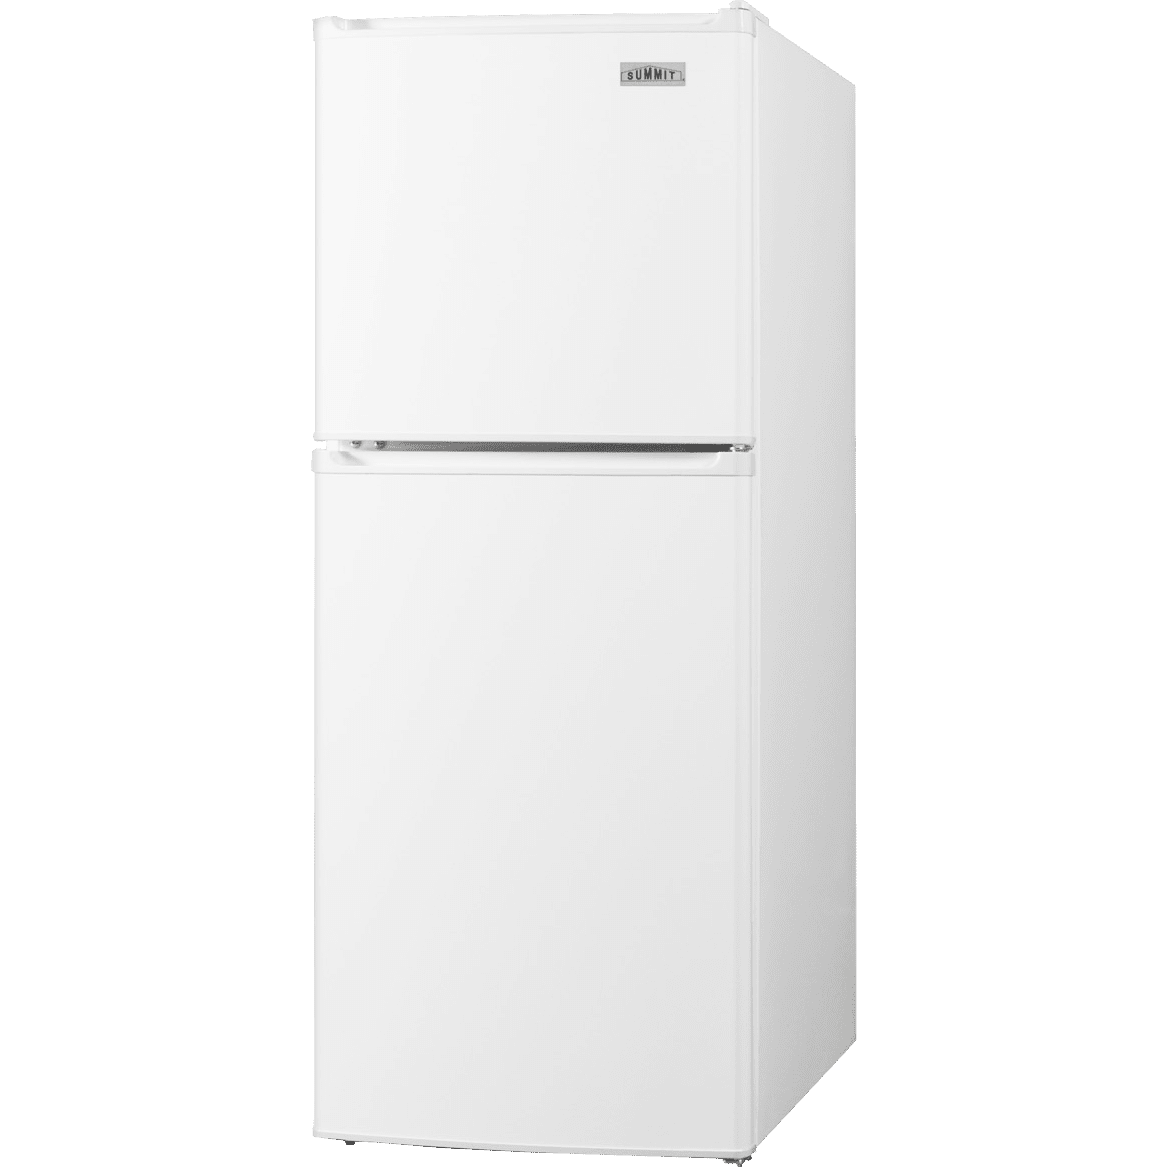 Magic Chef MCBR350S2 19 Mini Refrigerator 3.5 cu. ft. in Stainless